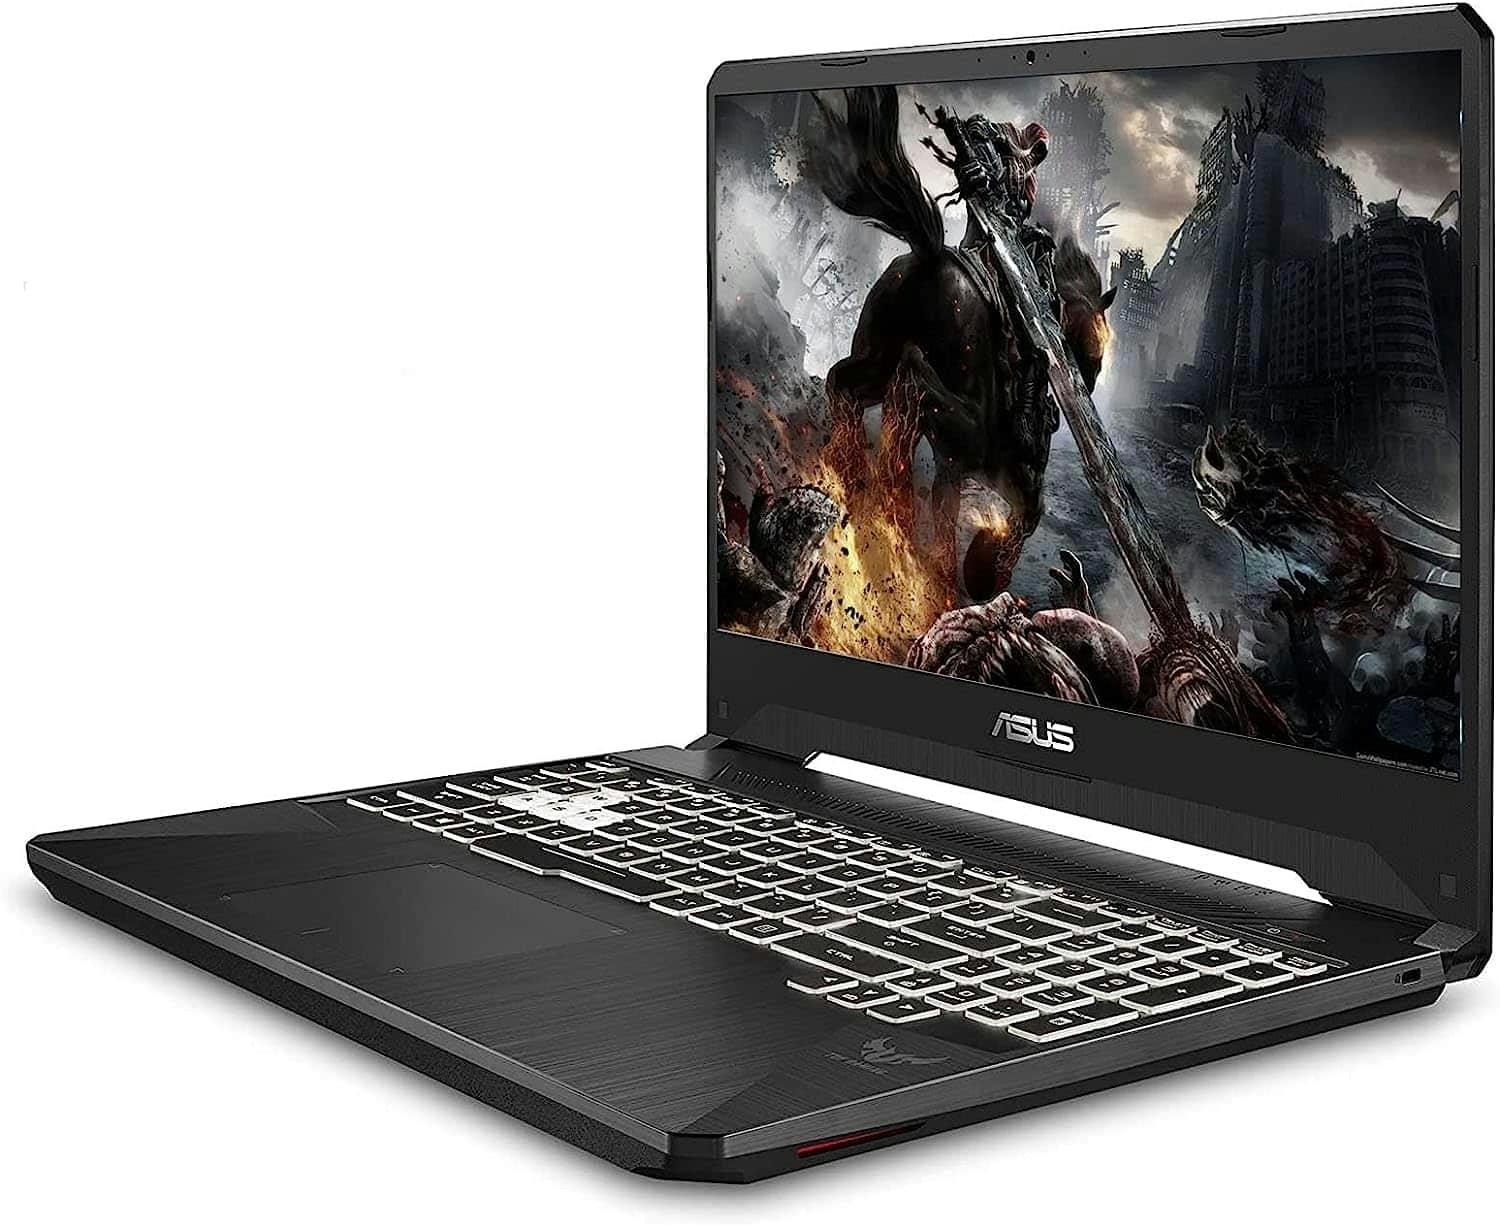 Gaming laptop screen resolution explained